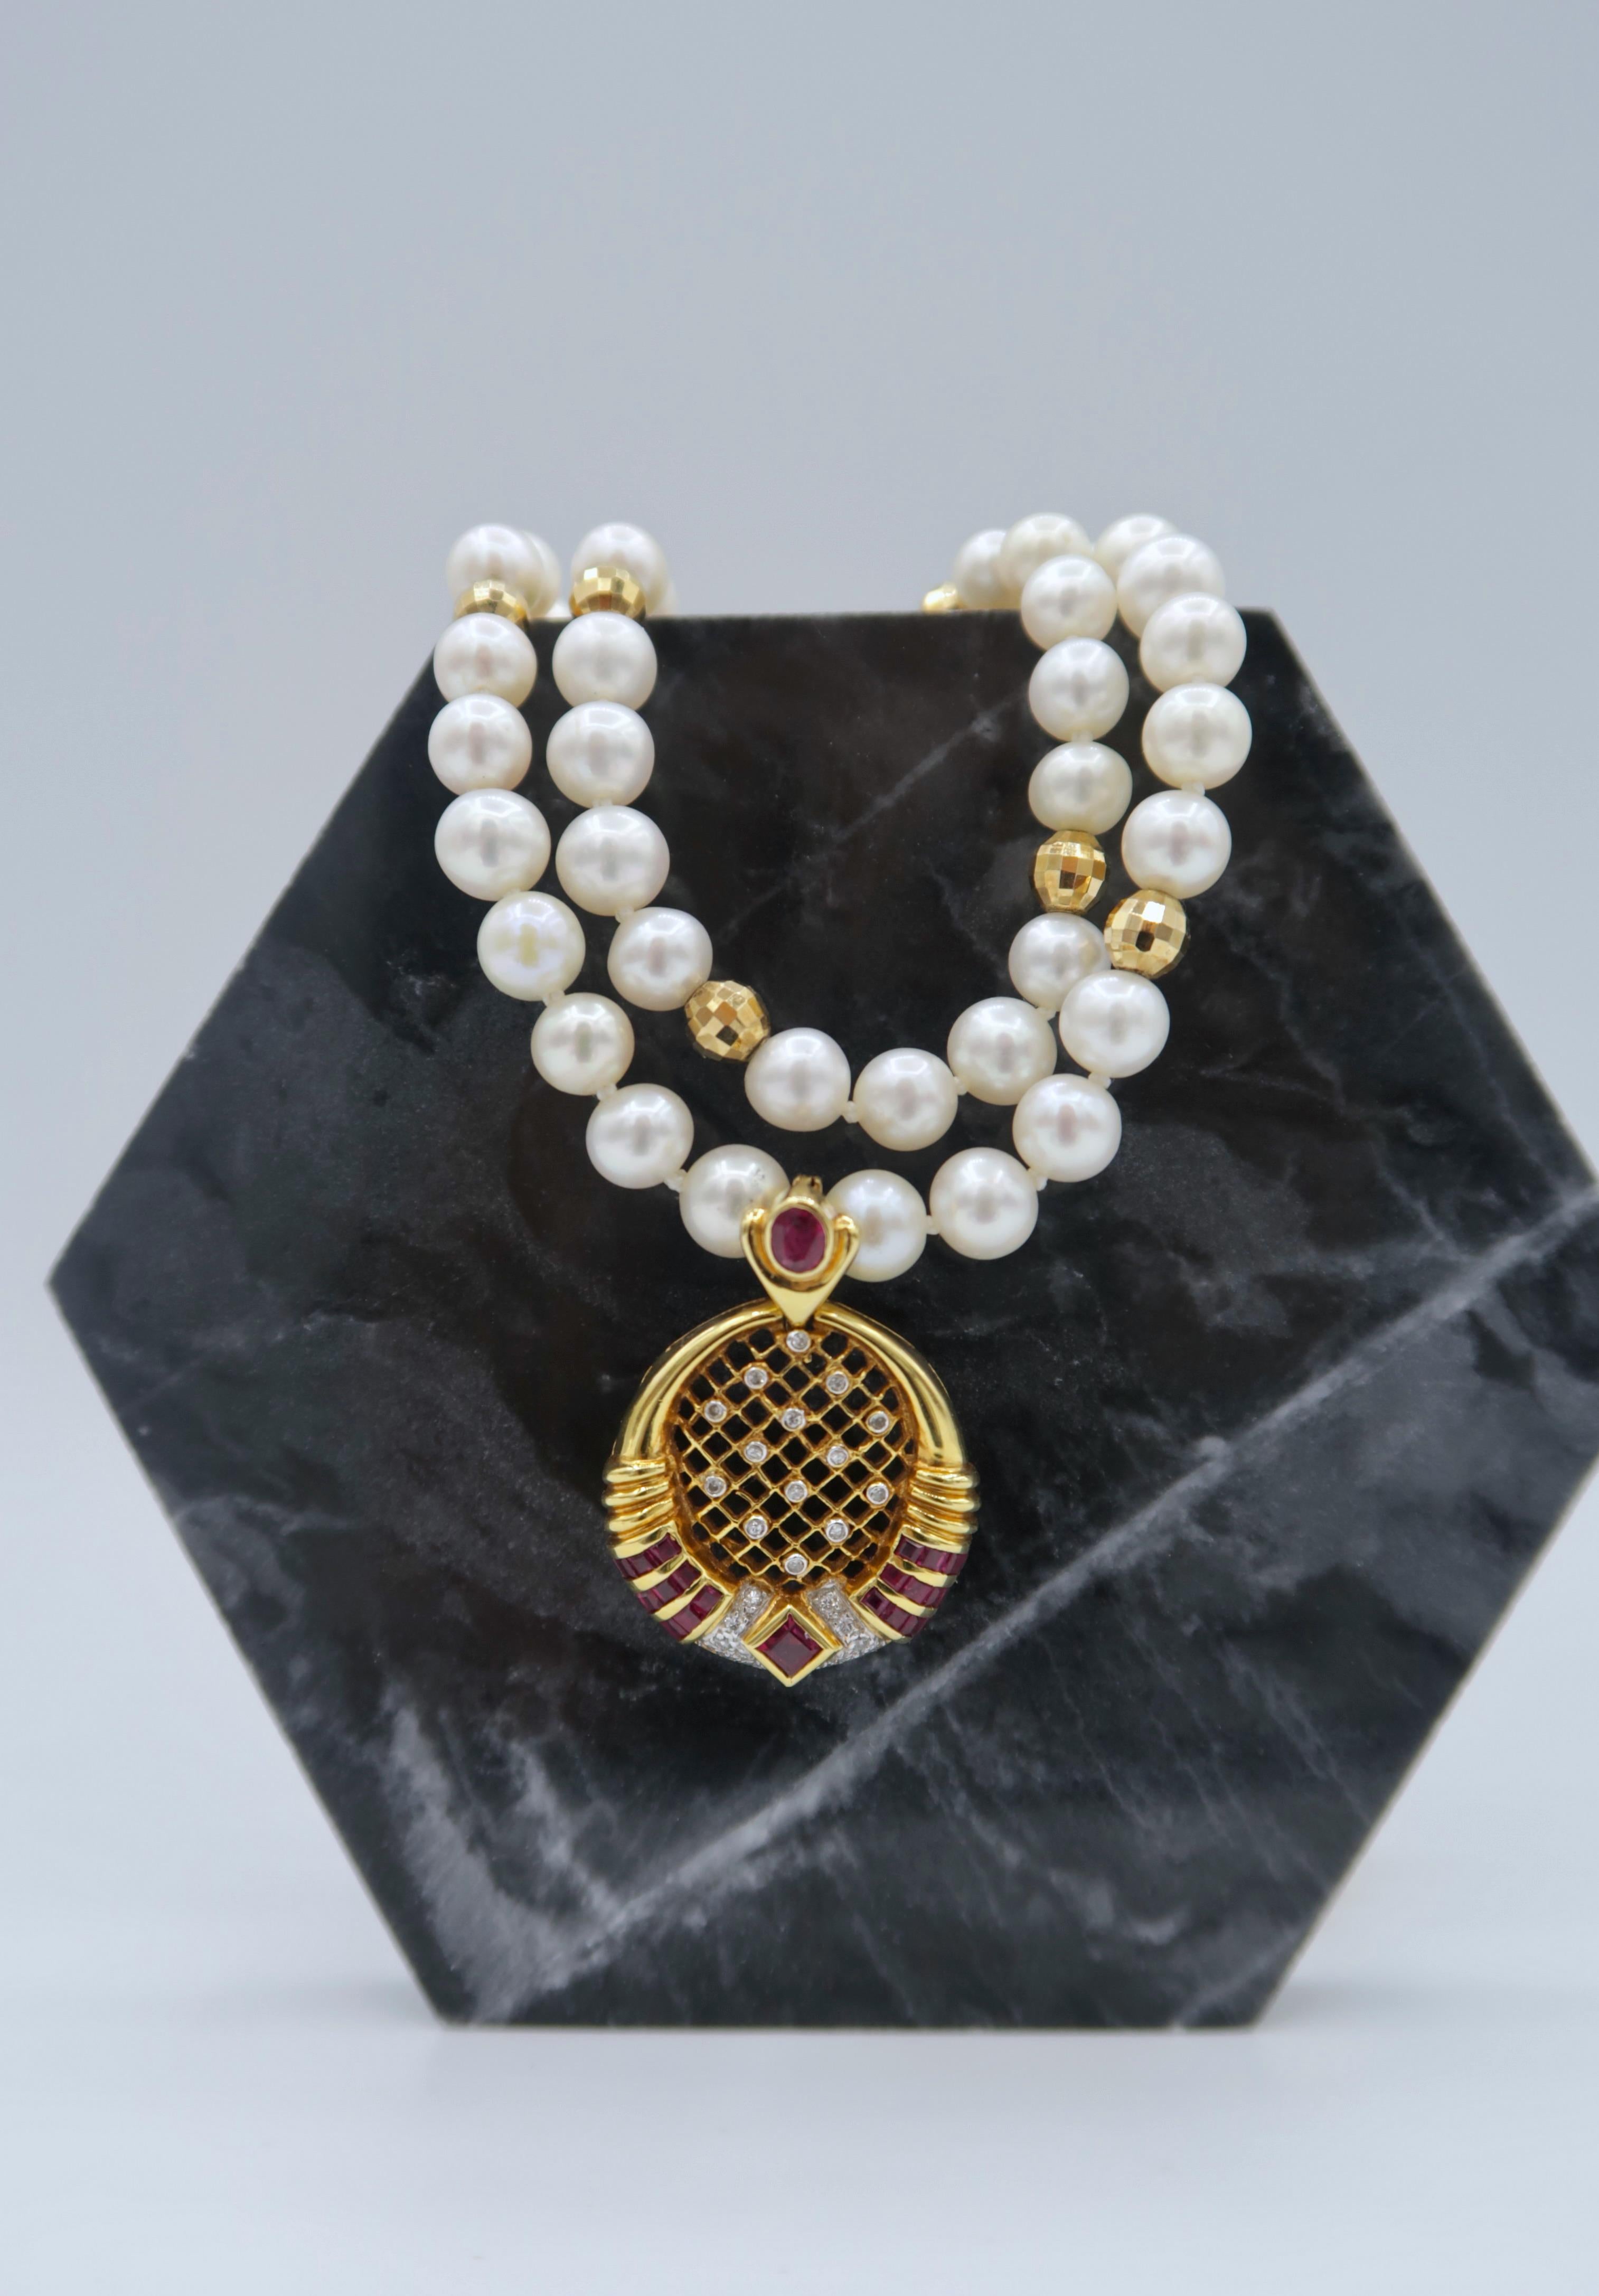 Detachable Velvety Red Ruby Diamond Perforated Medallion Pendant in 18K Yellow Gold on Double Strand Pearl Necklace with Faceted Gold Beads

Pendant
Gold: 18K Yellow Gold, 5.80 g
Ruby: 2.24 ct
Diamond: 0.20 ct

Necklace
Length: 16.5 inches
Pearl: